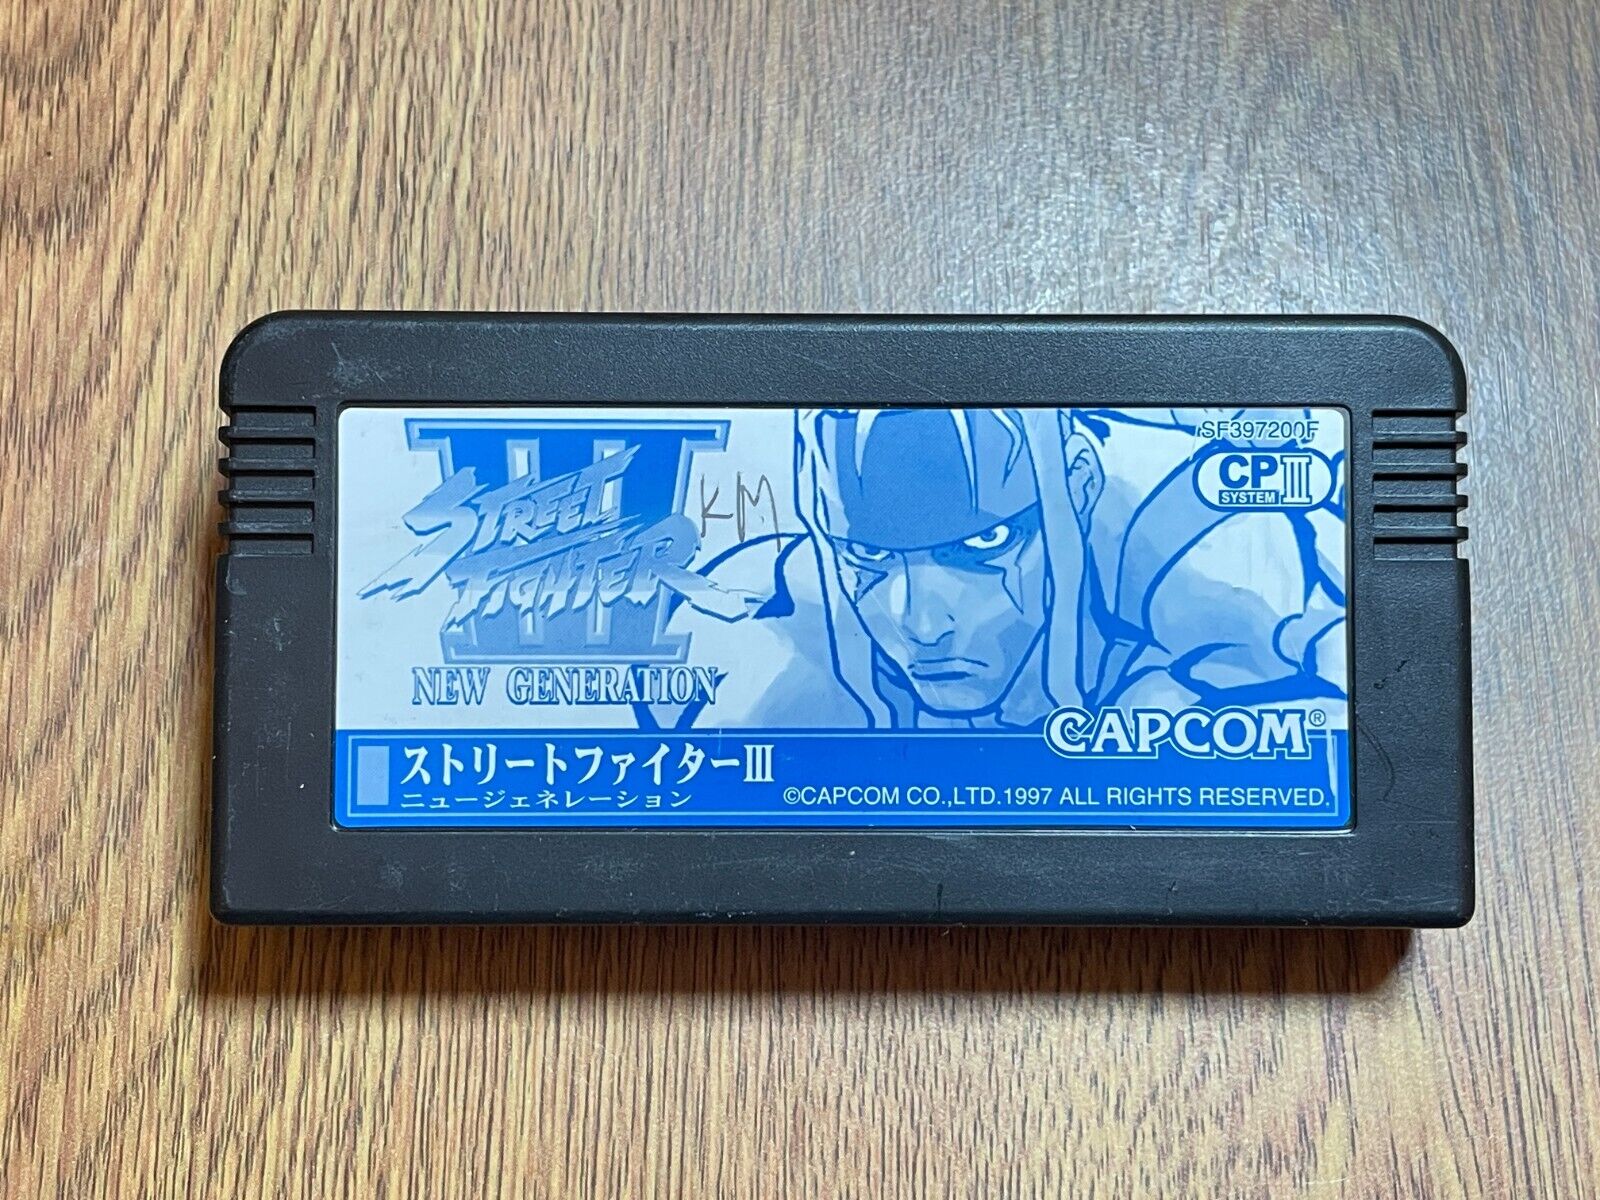 CP SYSTEM Ⅲ  security cartridge STREET FIGHTER ⅢNEW GENERATION